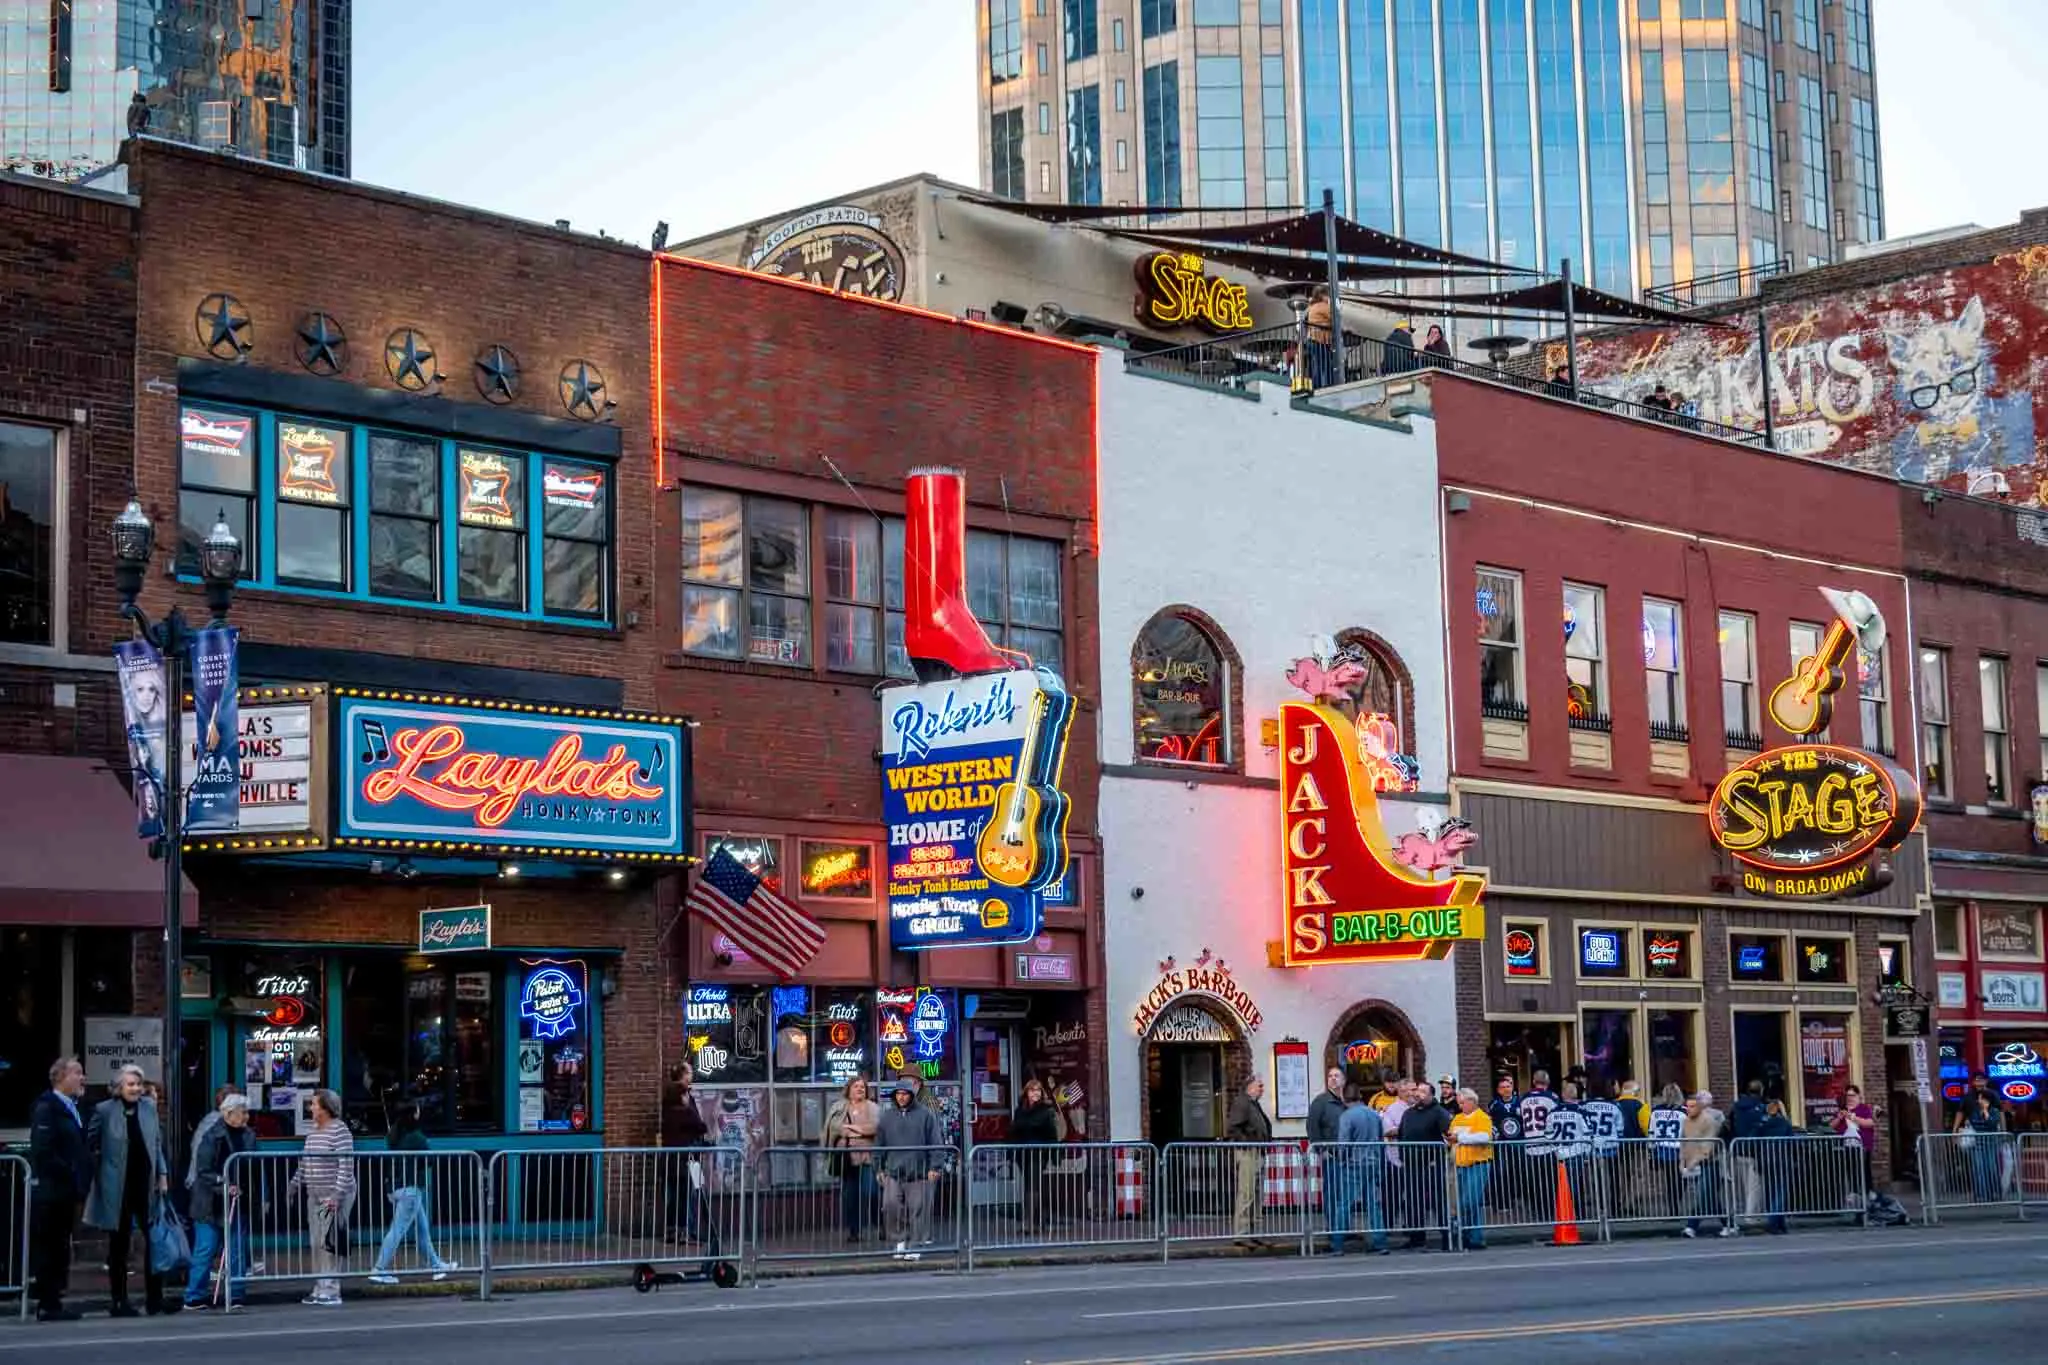 Exteriors and neon signs for honky tonks in Nashville, Tennessee